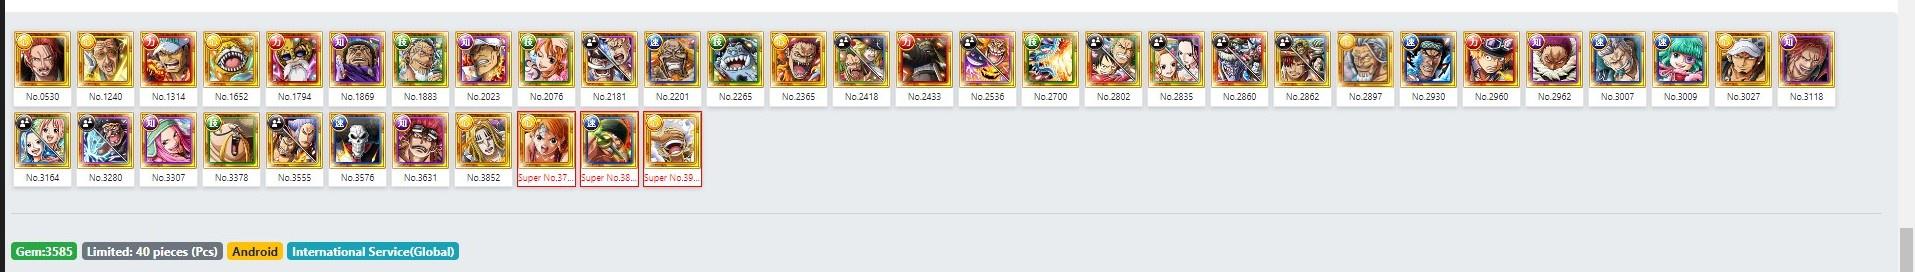 G5 Luffy-Zoro and Nami [Android] GLOBAL Best Starter lv3 Story Untouched Top Tier Characters 3580+ Gems Check Description